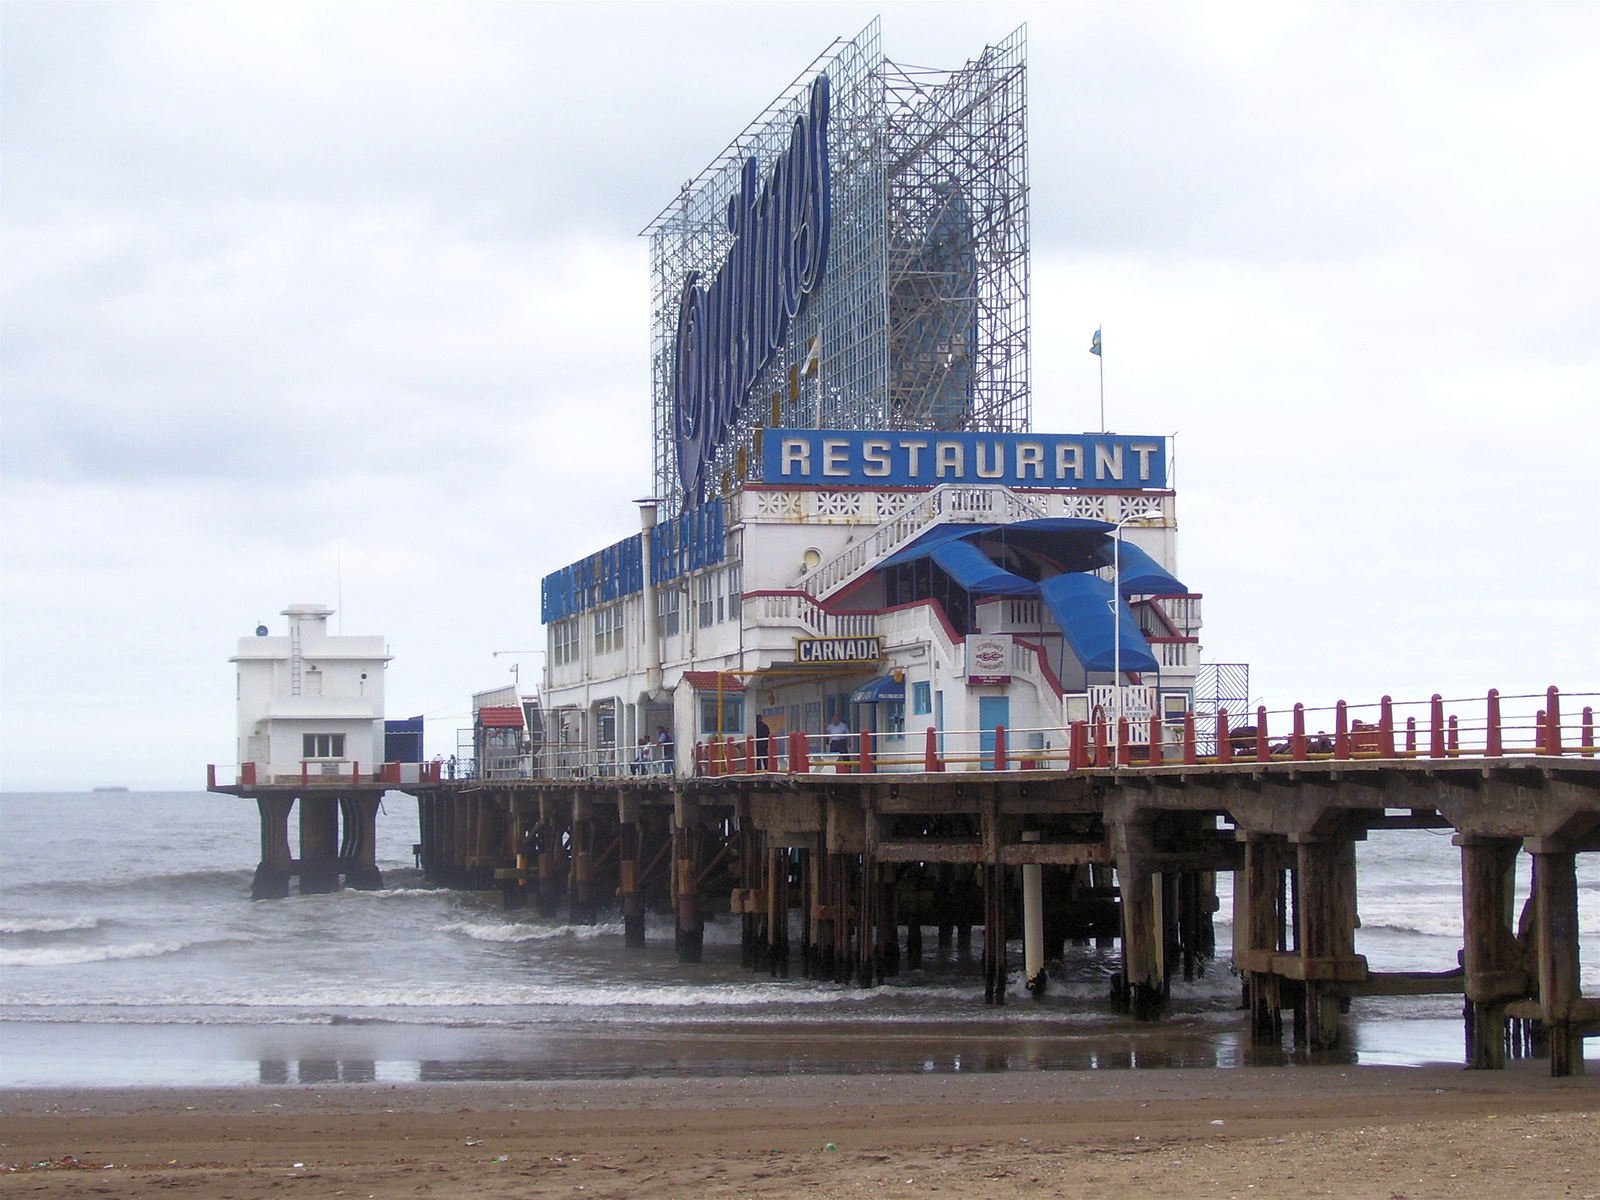 the boardwalk is still in use and has been constructed